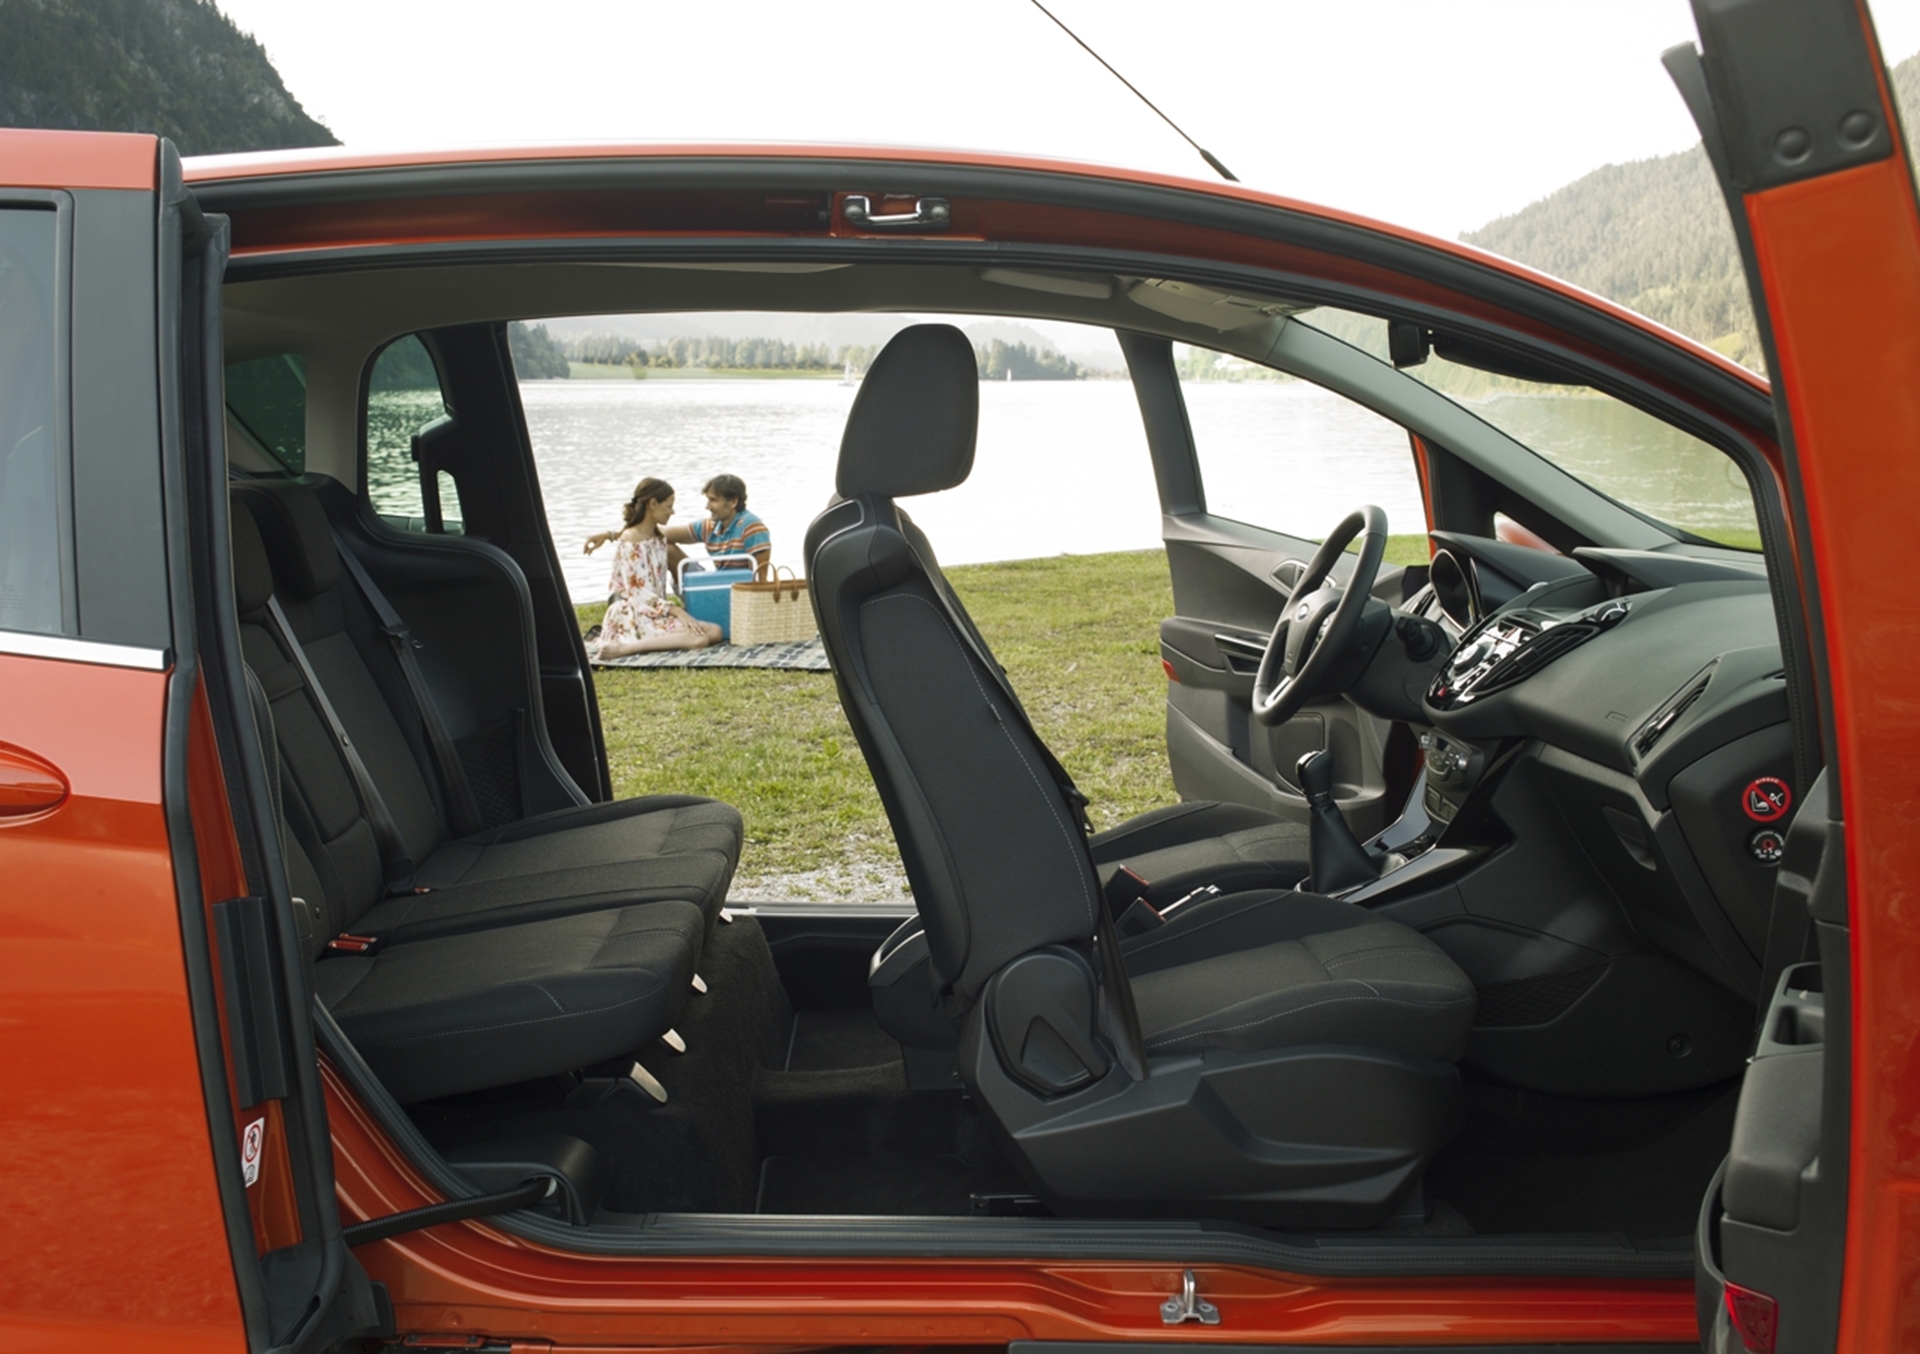 Stylish New Ford B-MAX Opens Doors to Practical Solutions for City Driving